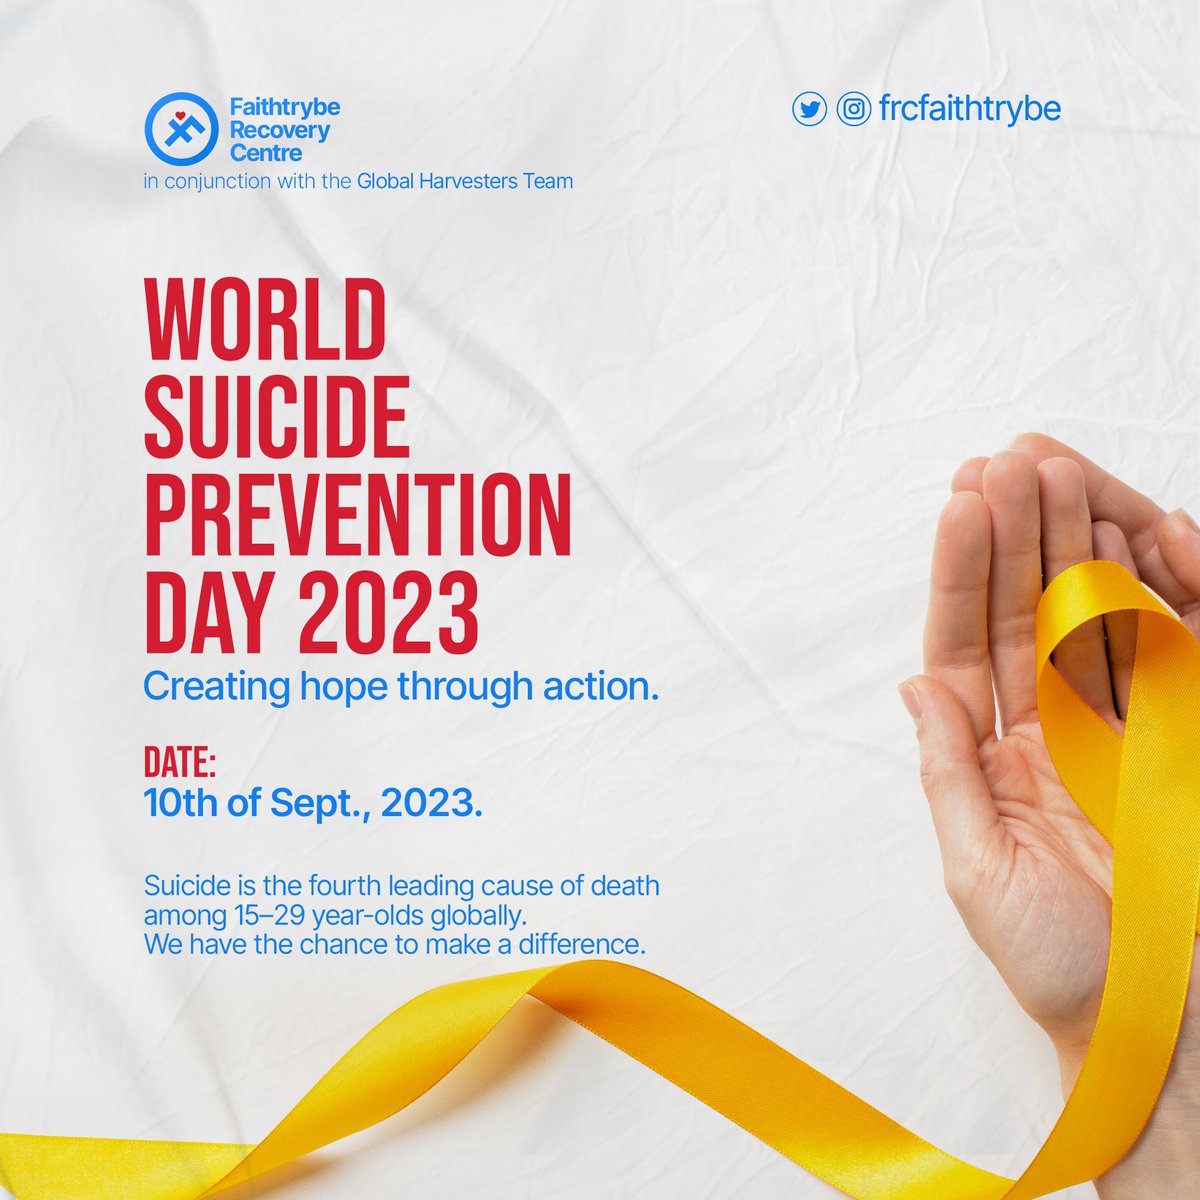 Join us on Sept 10 for #WorldSuicidePreventionDay 🌍 Let's unite, challenge stigma, and provide hope. Stay tuned for resources and ways to get involved. Together, we'll make a difference. #WSPD23 #CreatingHopeThroughAction #FRCCares #SuicidePreventionAwarenessMonth